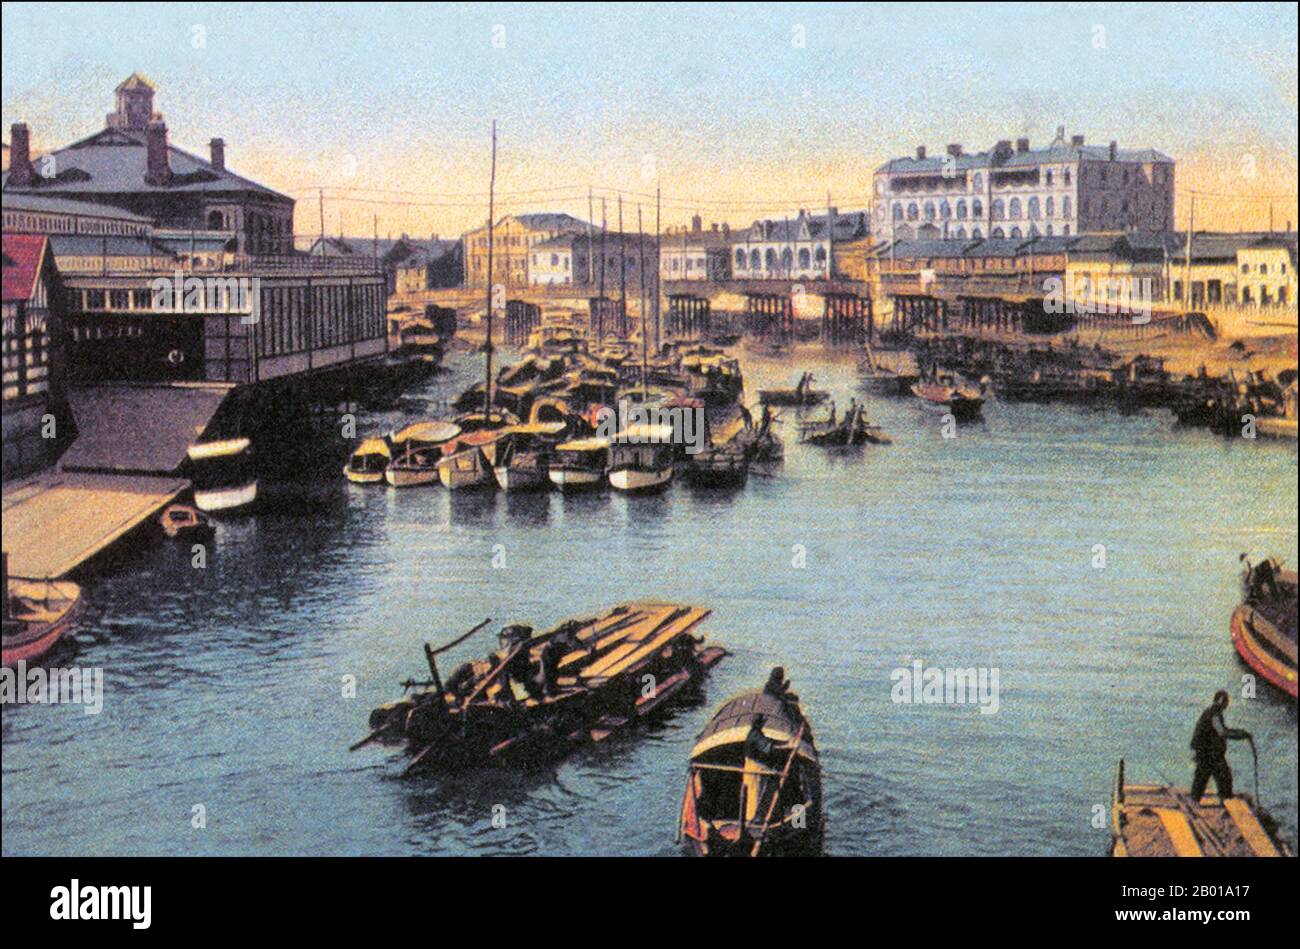 China: Suzhou Creek and Shanghai Rowing Club. Postcard, c. 1920.  Suzhou Creek (also called Wusong River) is a river in China that passes through the Shanghai city centre. It is named after Suzhou, a city in neighbouring Jiangsu province which was the predominant city in this area prior to the rise of Shanghai as a metropolis.  One of the principal outlets of Lake Tai, Suzhou Creek has a length of 125 km, of which 54 km are within the administrative region of Shanghai and 24 km within the city's highly urbanized parts. The river flows into the Huangpu River at the northern end of the Bund. Stock Photo